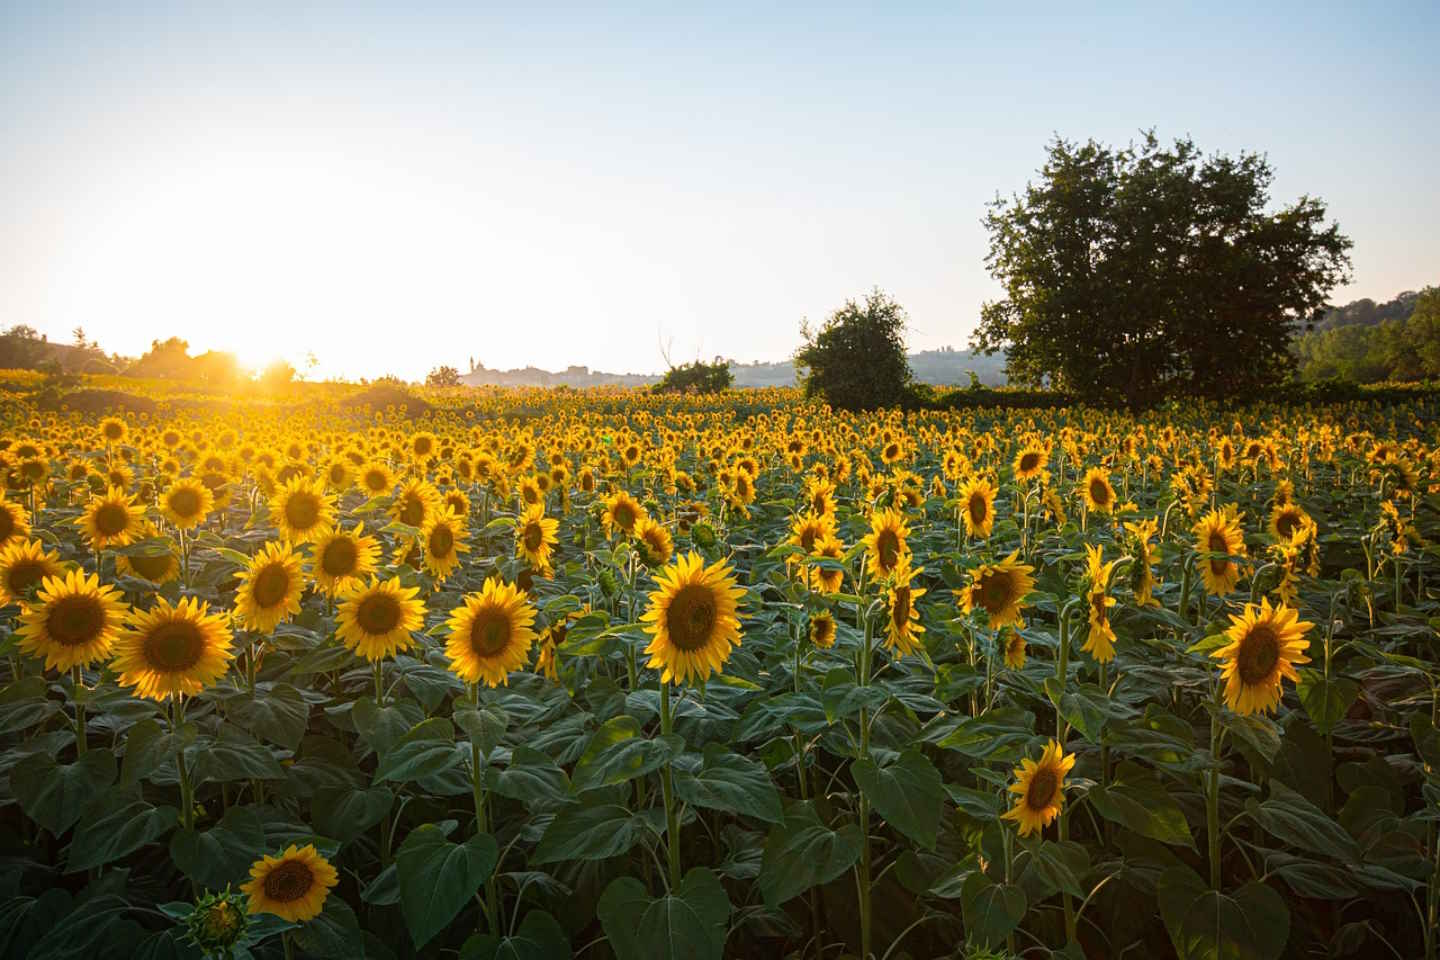 Farmers will receive more subsidies for sunflower crops